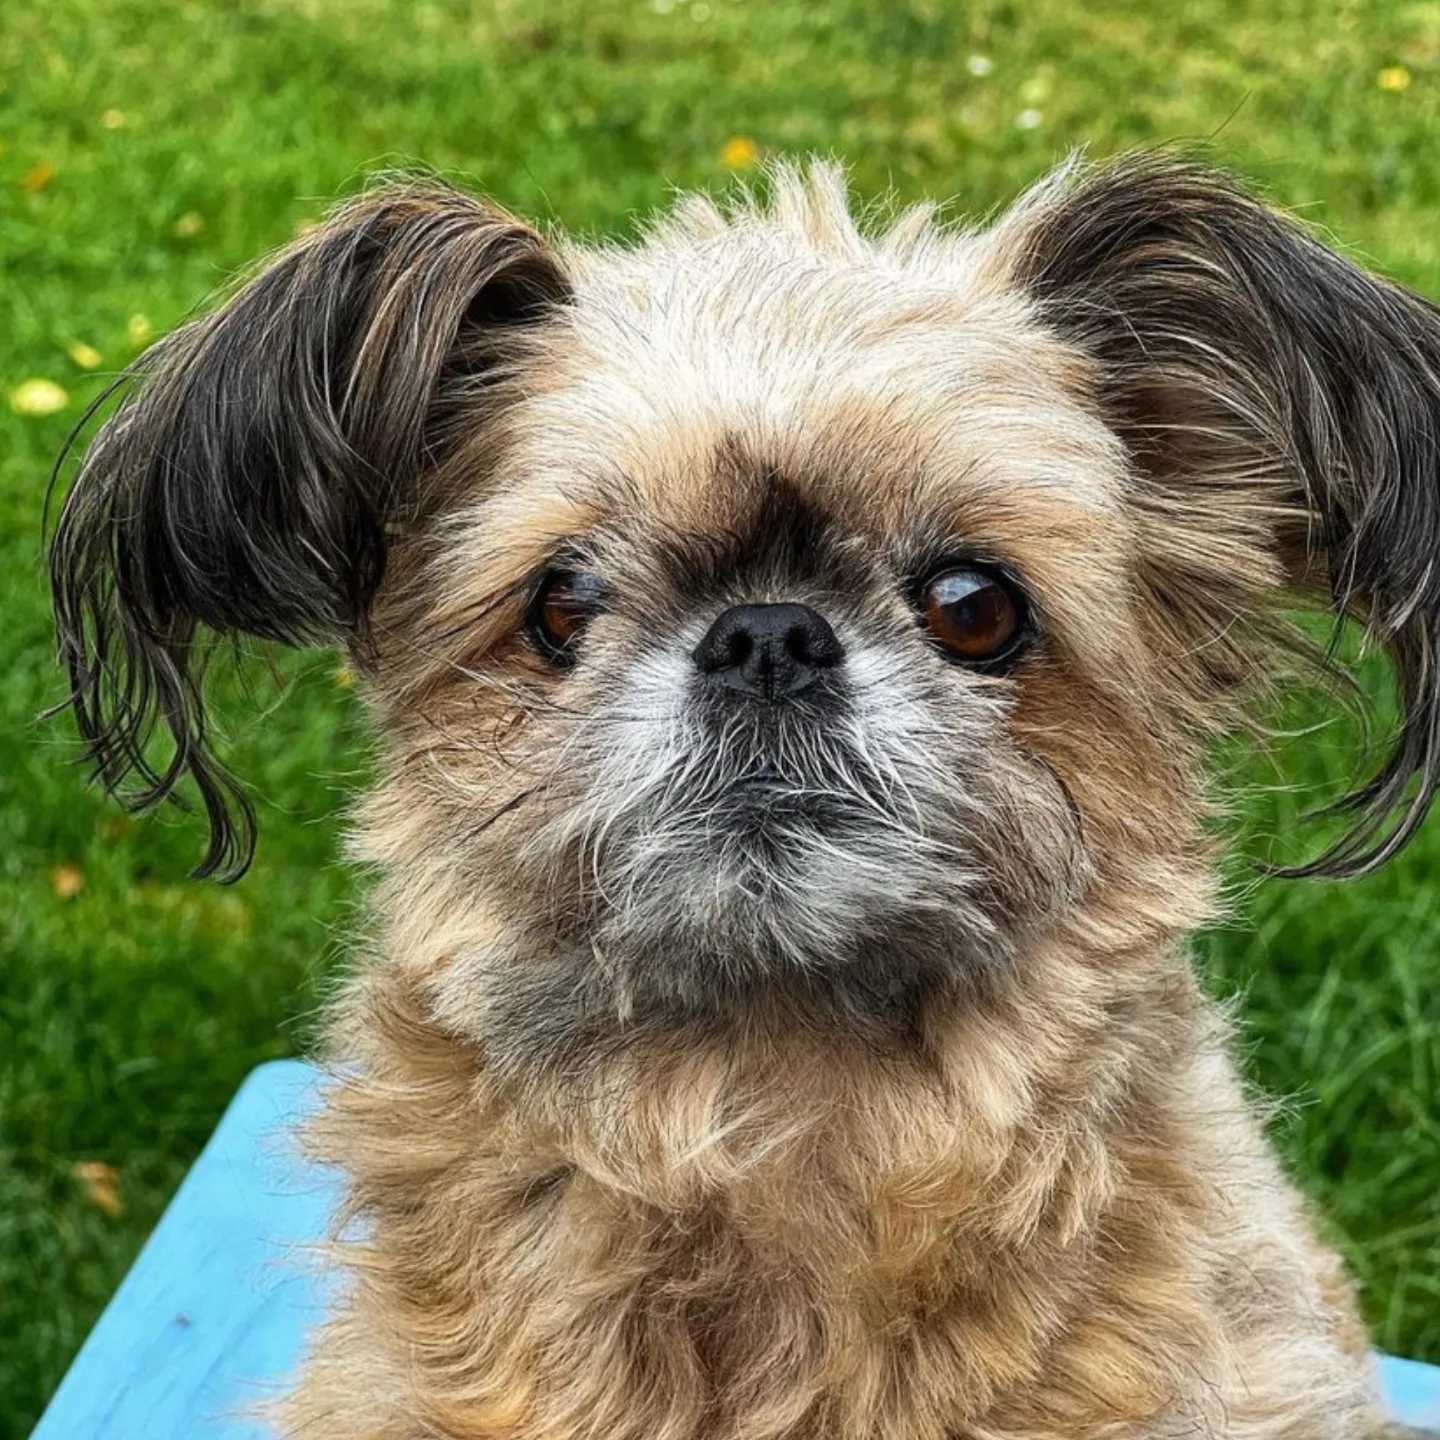 An adorable dog in a park looking at the camera